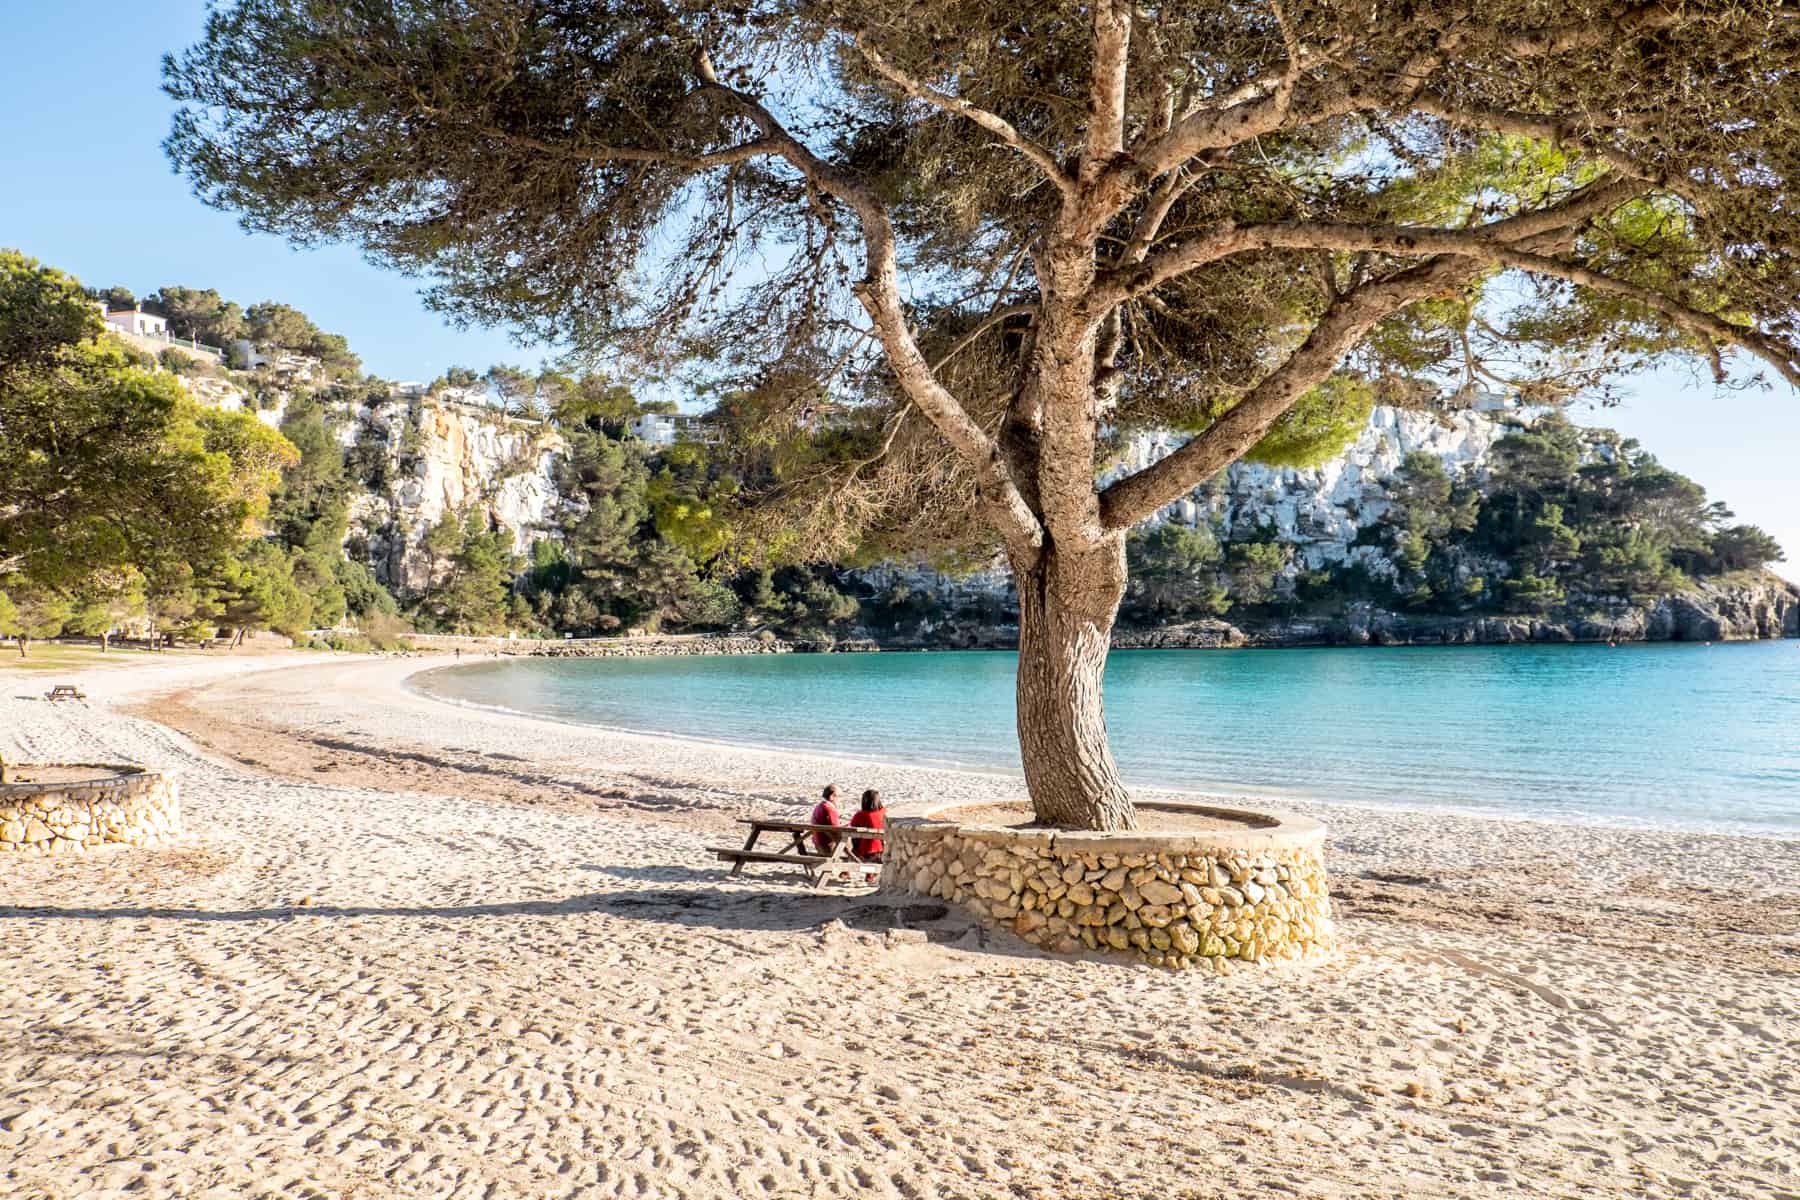 A couple sit on a bench under a large tree on a curving white sand beach, with a bright aqua sea.